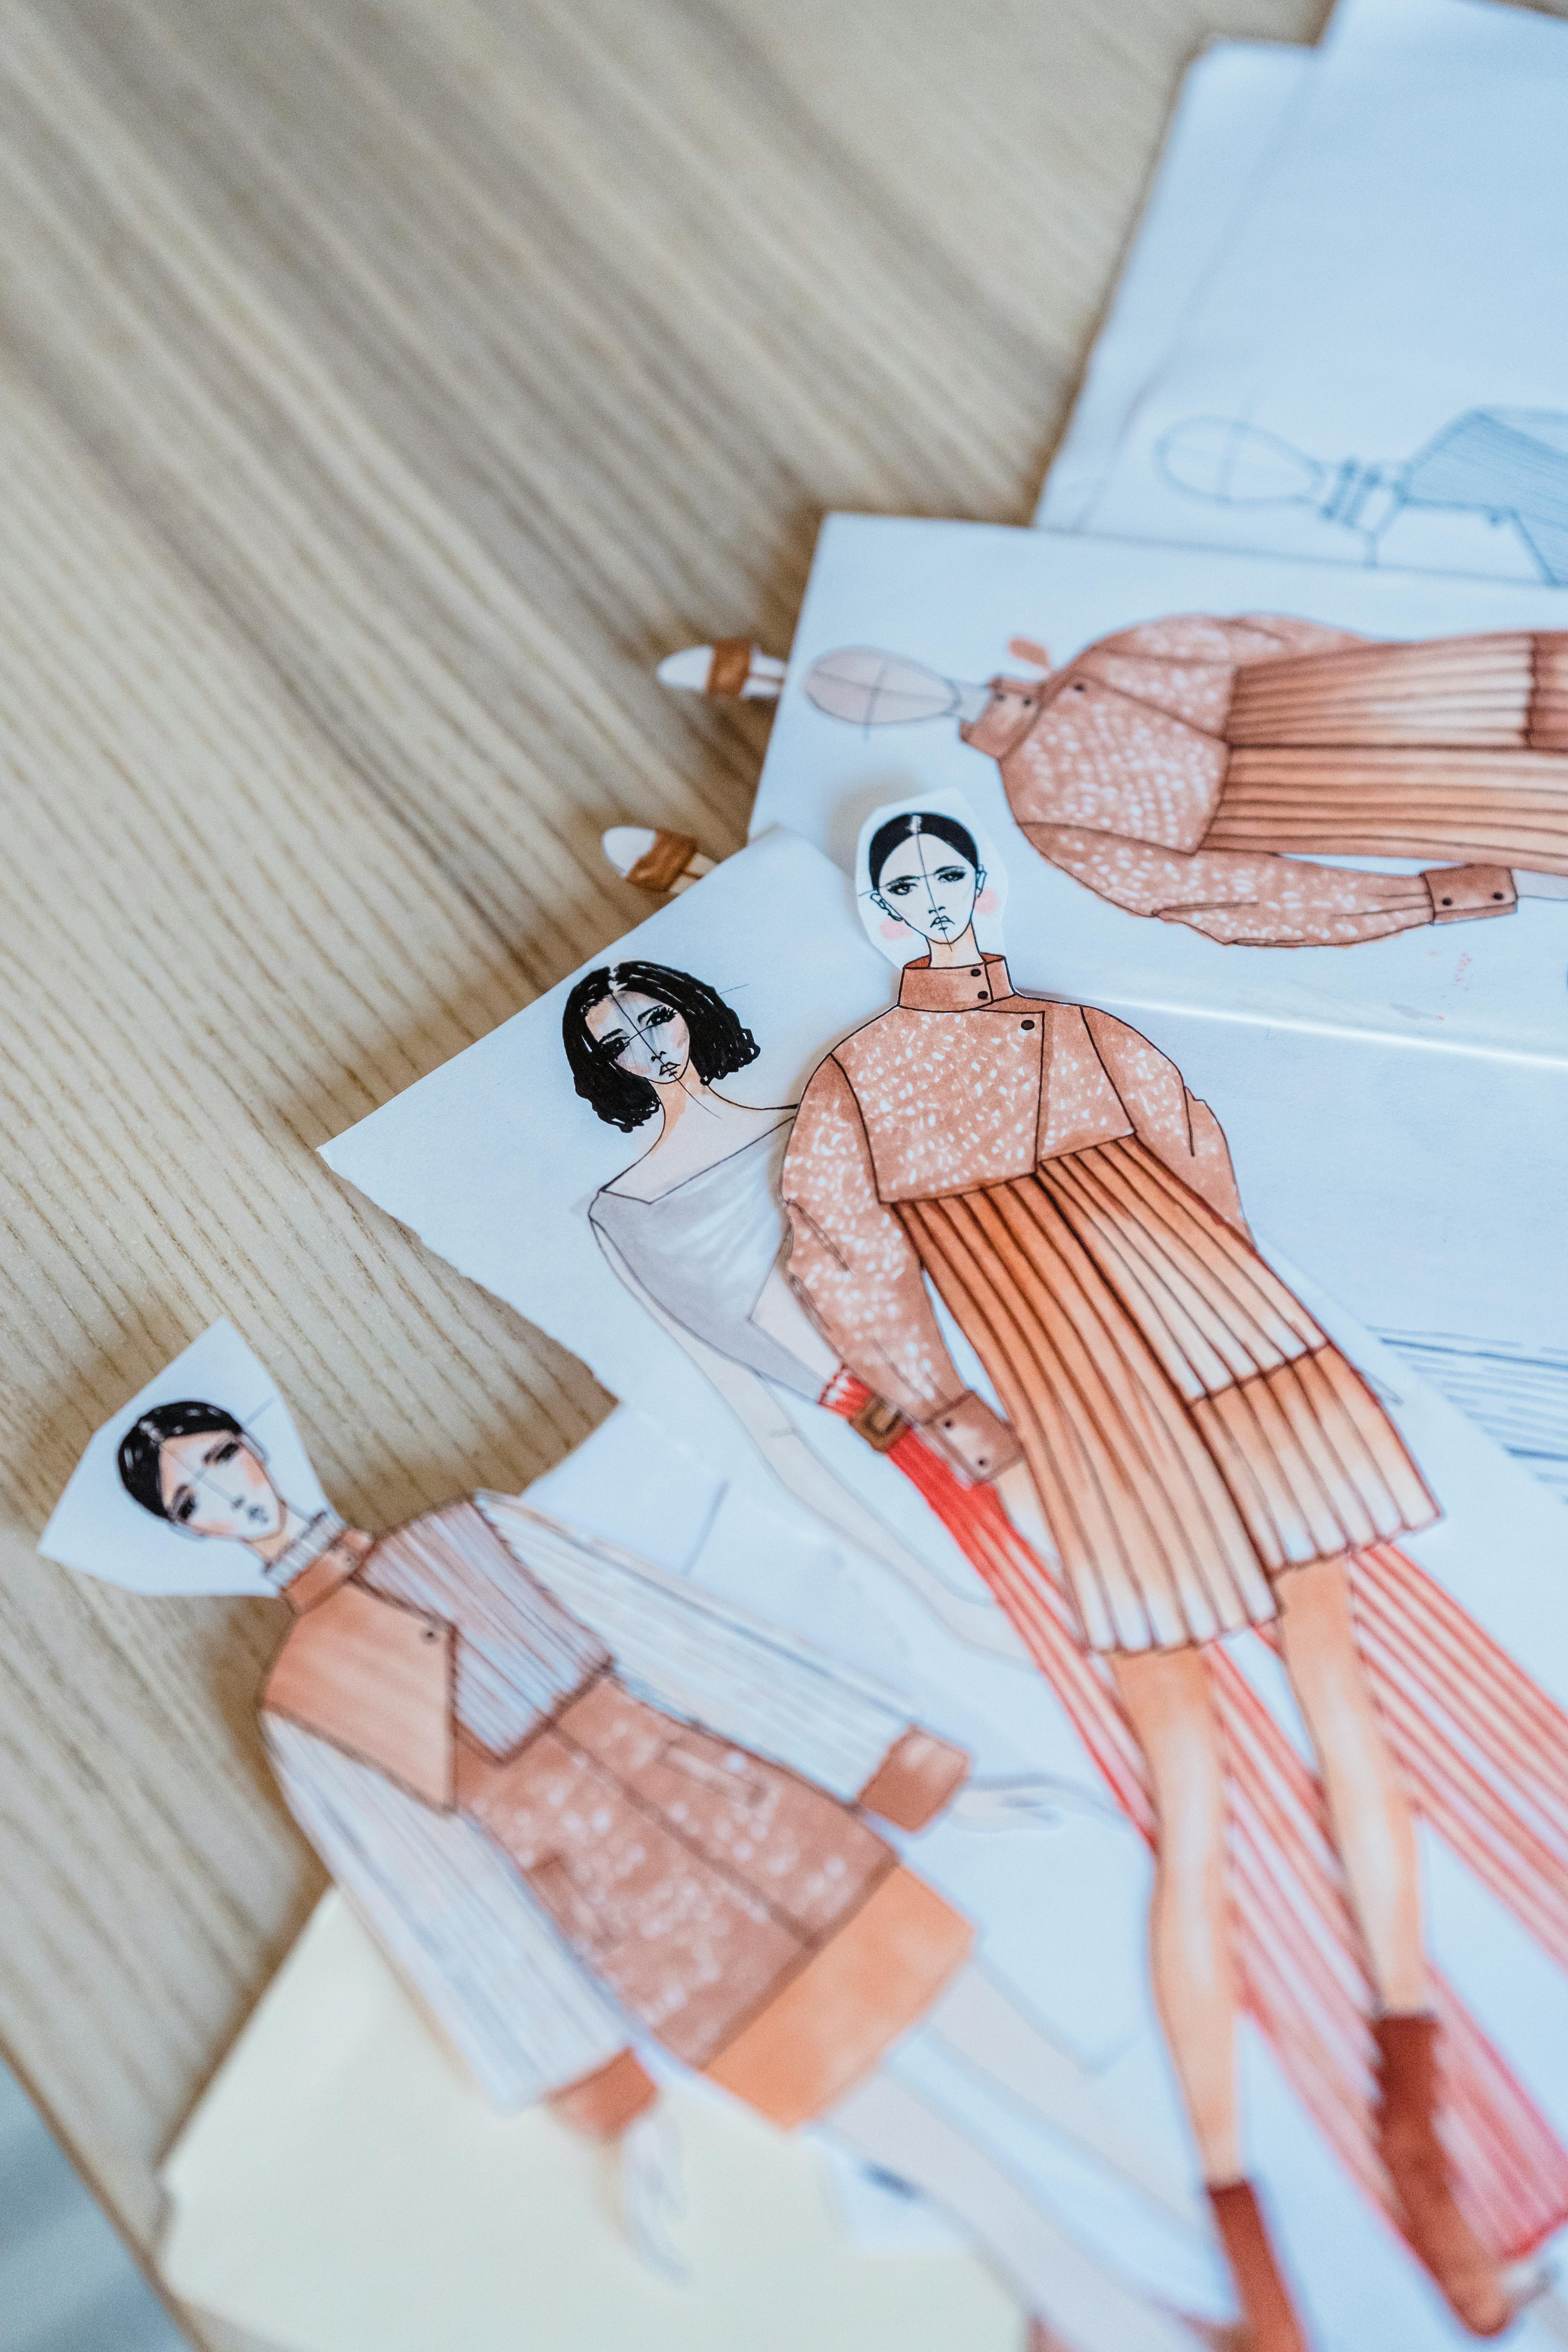 How to Create Fashion Design Sketches for Your Clothing Line